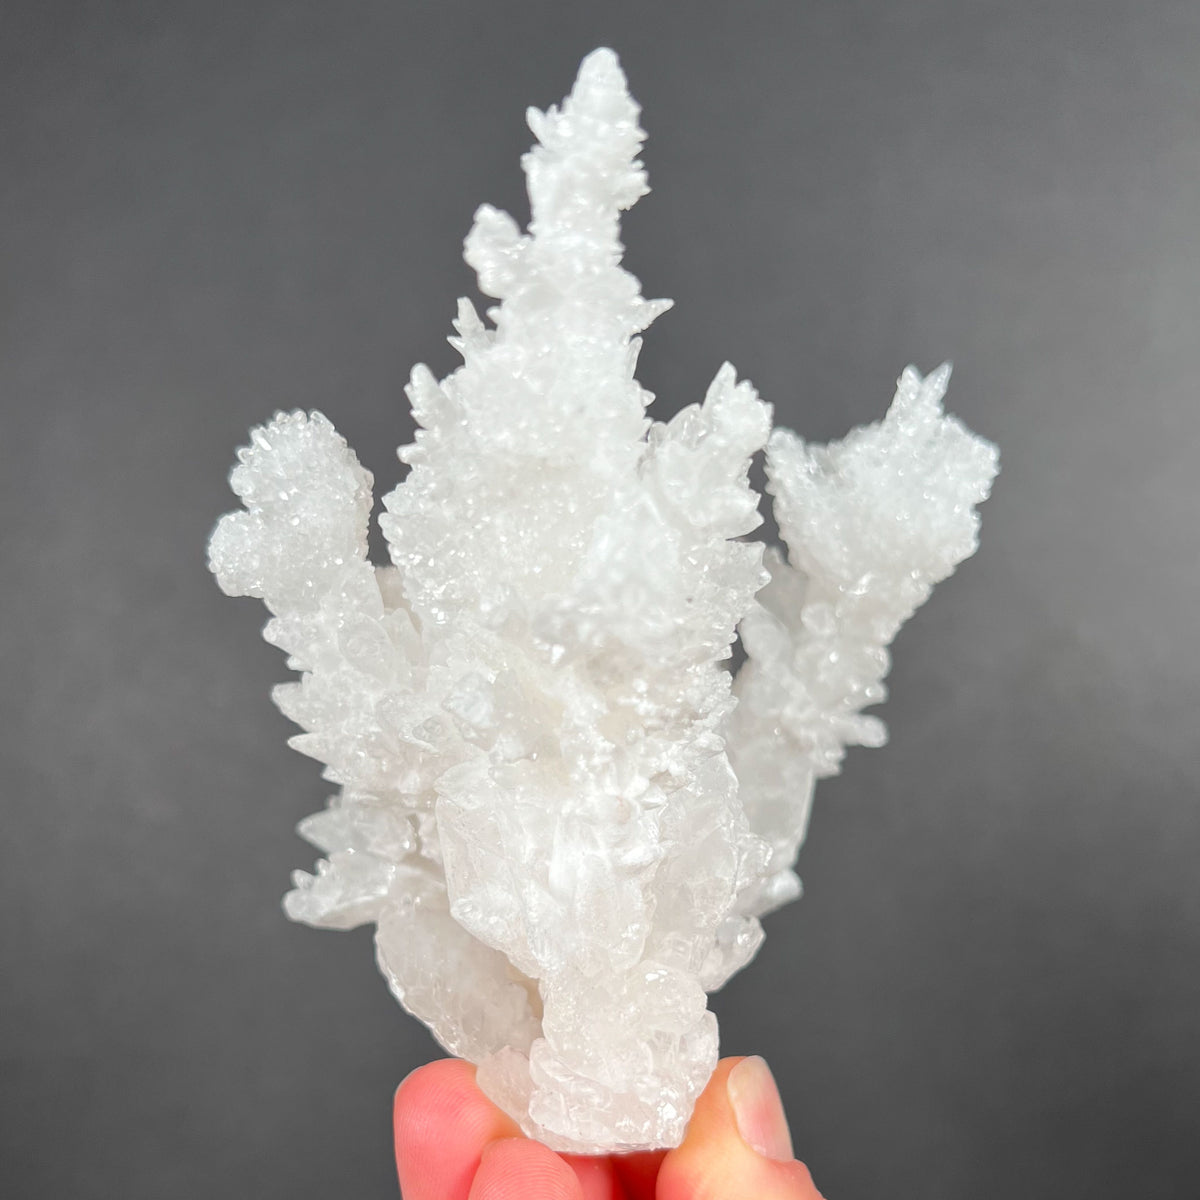 White Crystals of Calcite